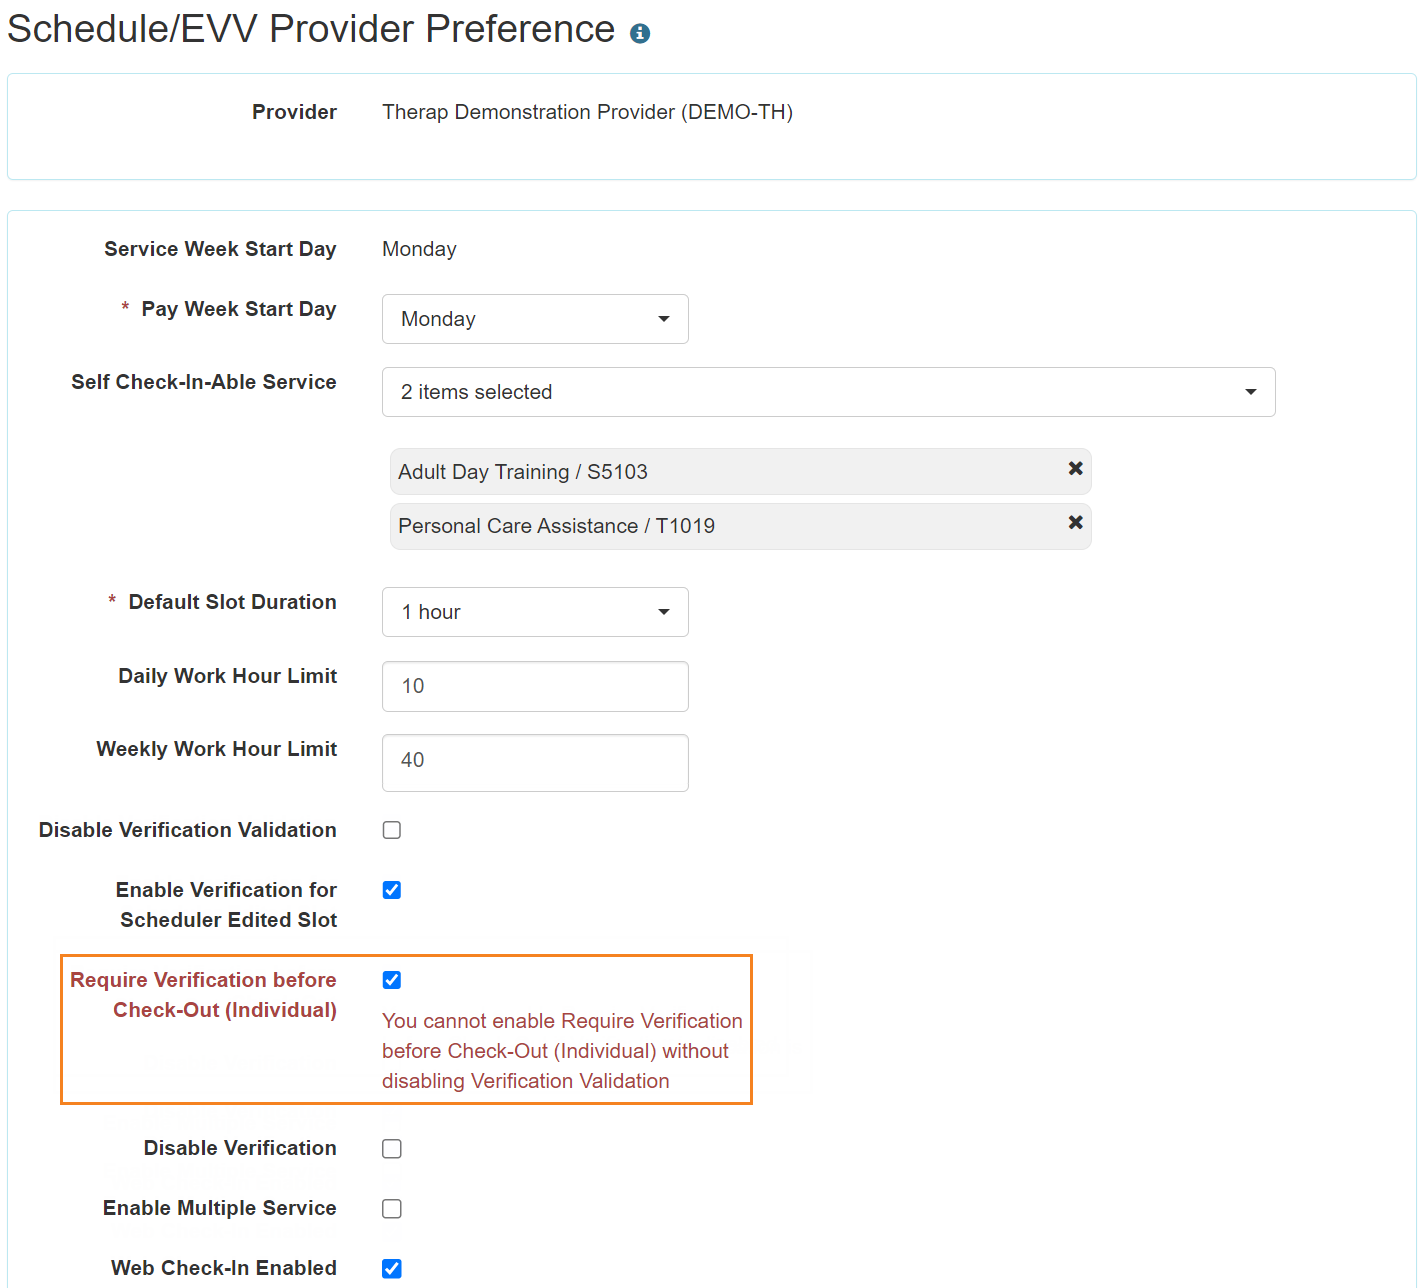 Screenshot of the Schedule/EVV Provider Preference page highlighting the error message for Require Verification before Check-Out checkbox